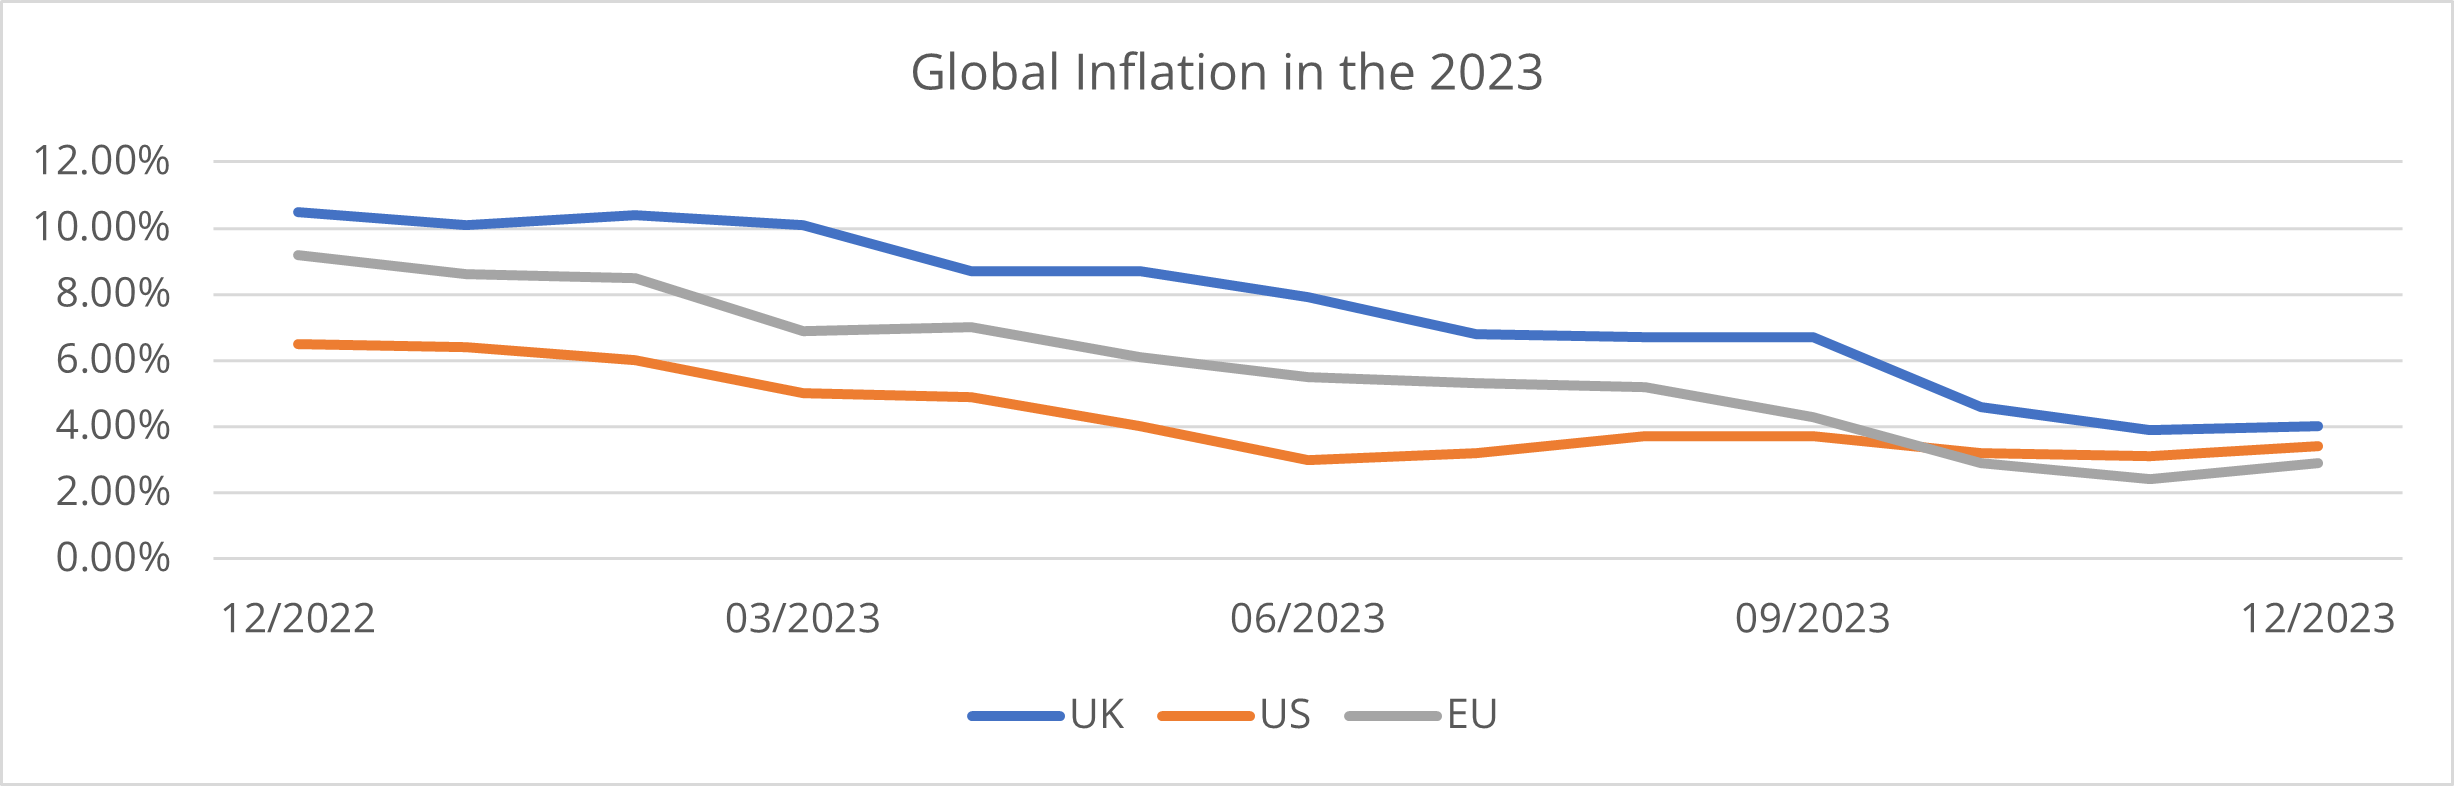 Chart of Global Inflation in 2023